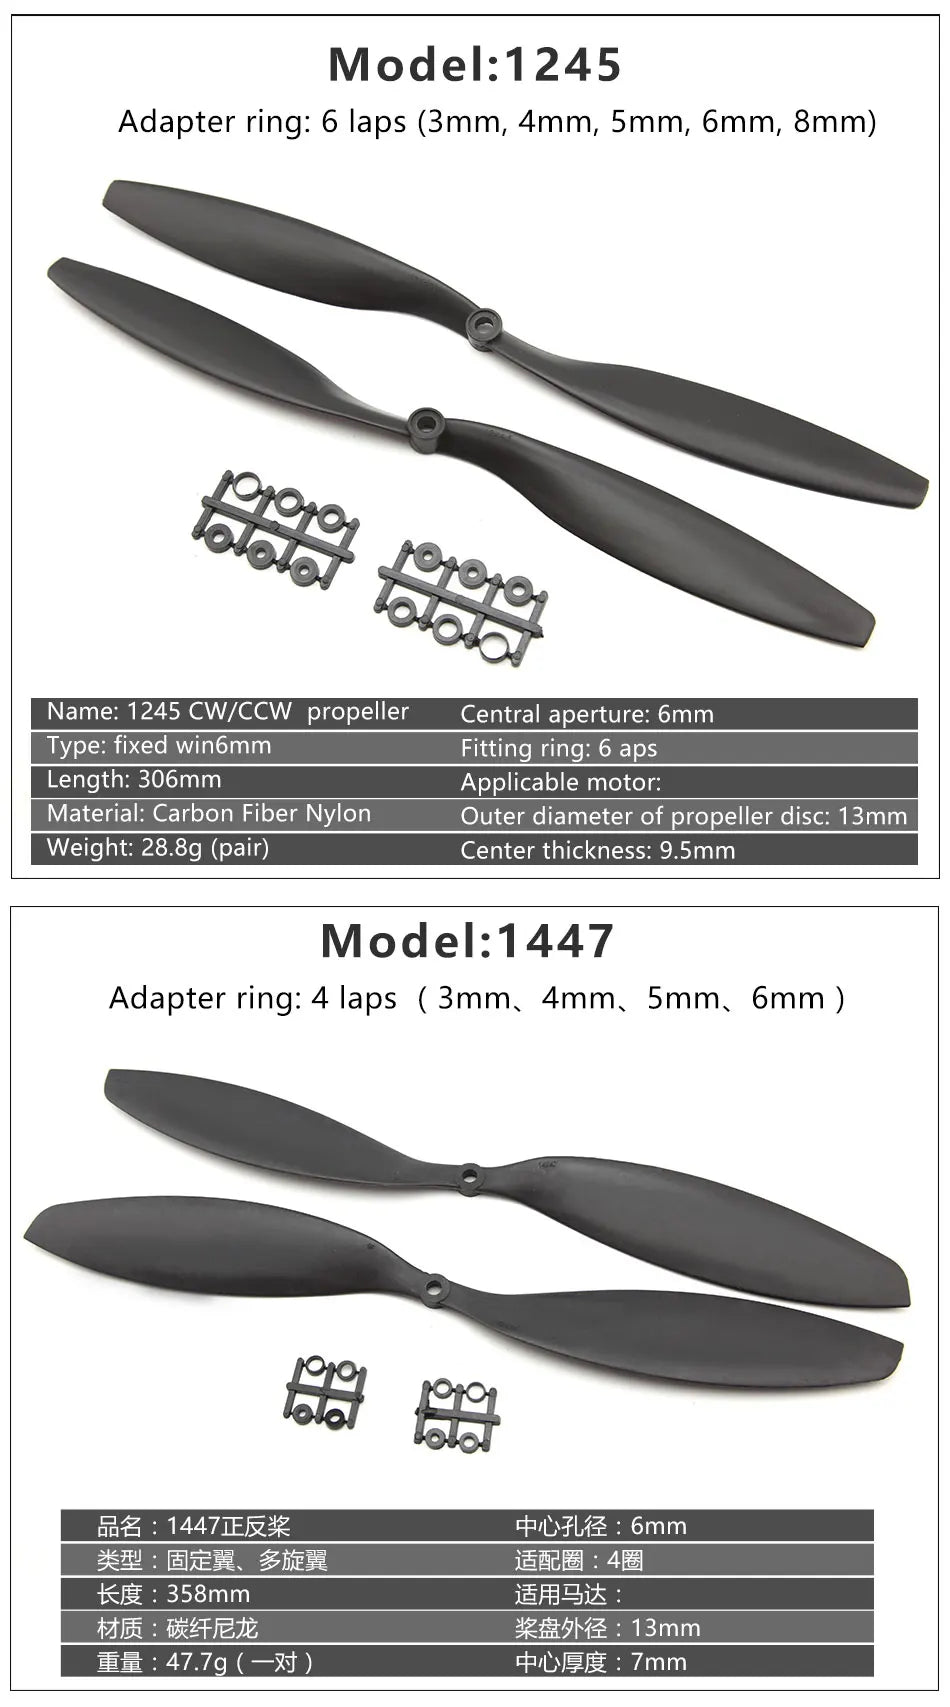 1245 CWICCW propeller Central aperture: 6mm Type: fixed win6mm